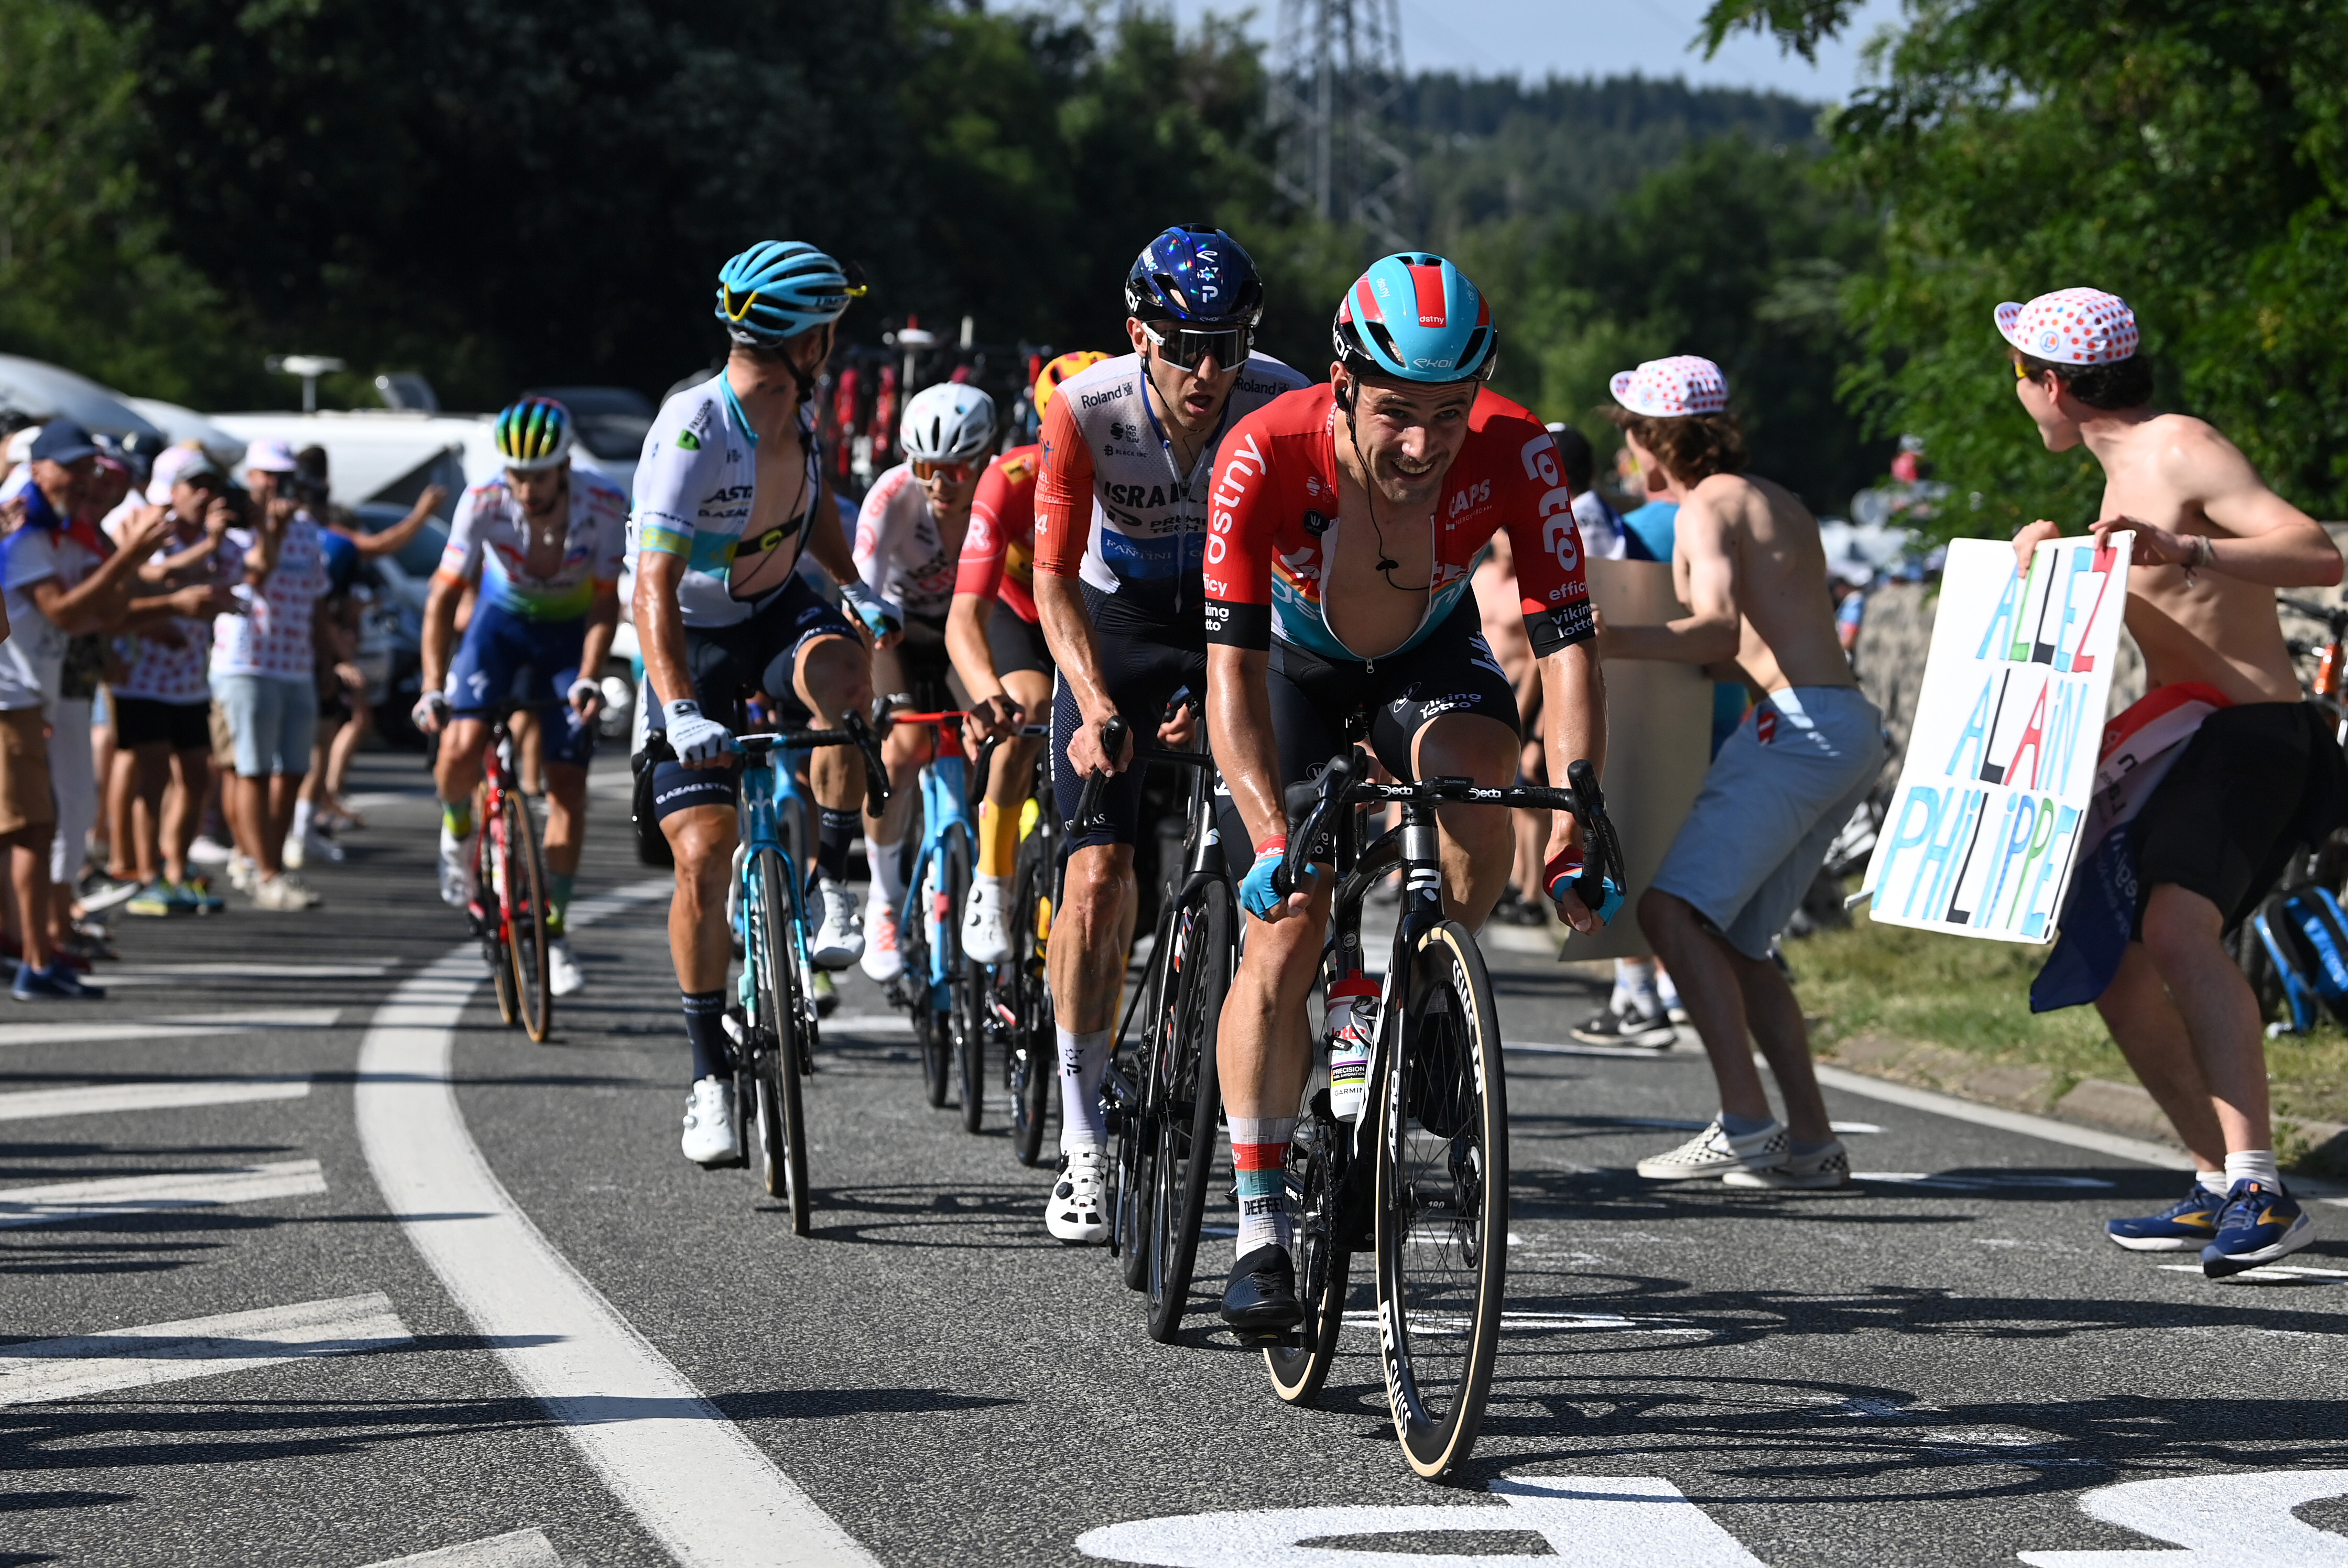 (L-R) Michael Woods of Canada and Team Israel-Premier Tech and Victor Campenaerts of Belgium and Team Lotto Dstny compete in the breakaway during the stage nine of the 110th Tour de France 2023 a 182.4km stage from Saint-Léonard-de-Noblat to Puy de Dôme 1412m / #UCIWT / on July 09, 2023 in Puy de Dôme, France.